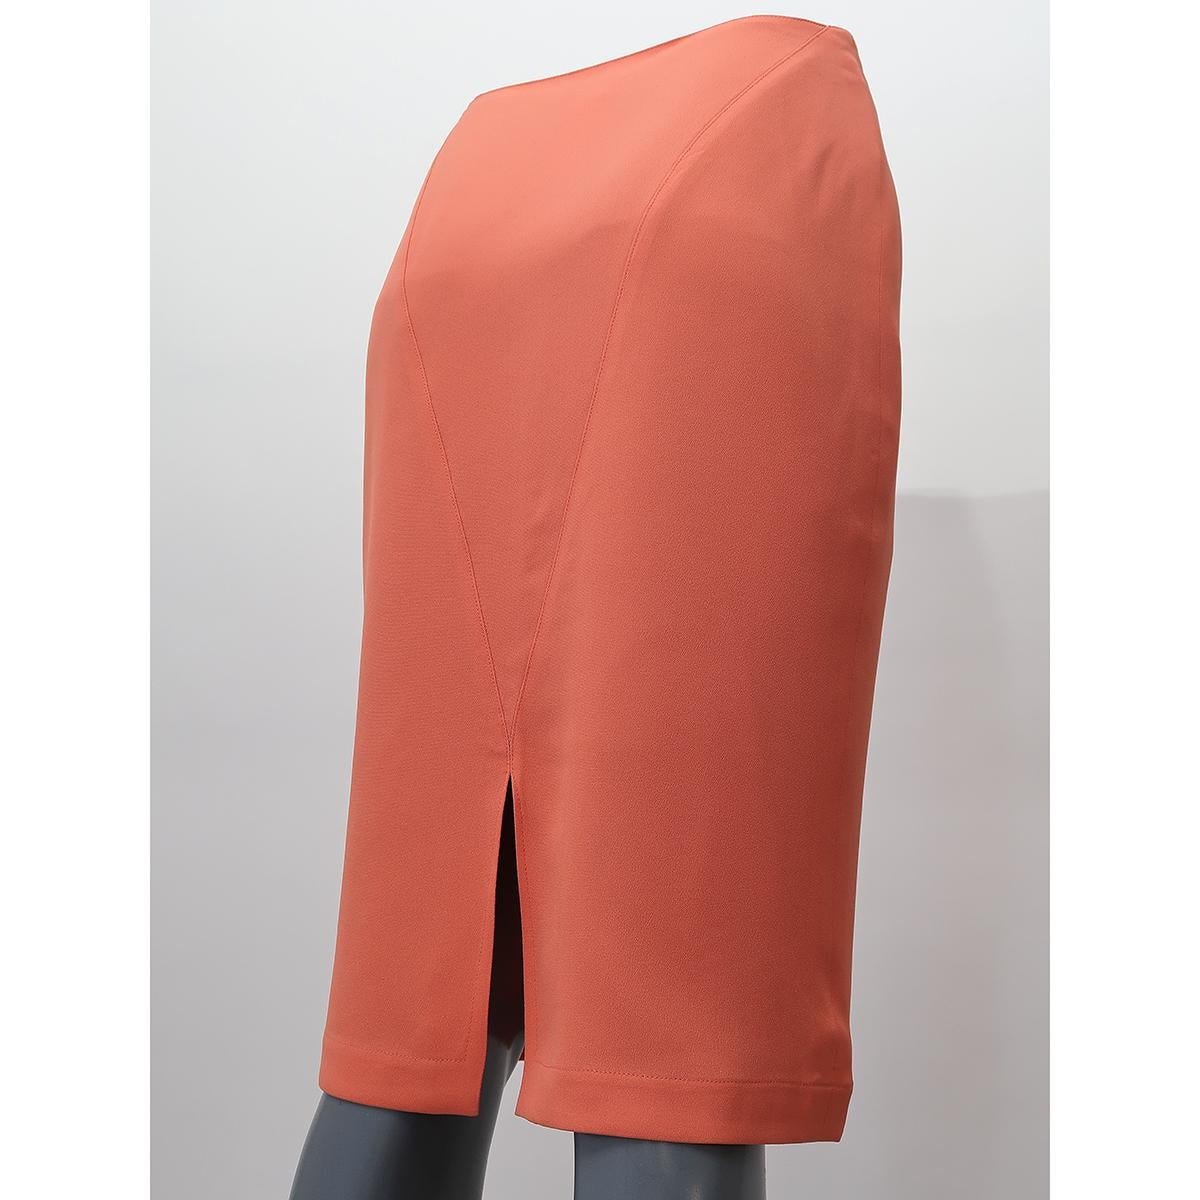 Thierry Mugler COUTURE
Introducing Thierry Mugler's iconic salmon color. This stunning piece captures the essence of Mugler's bold and visionary approach to fashion. Crafted from luxurious fabrics and featuring impeccable tailoring, this skirt is a